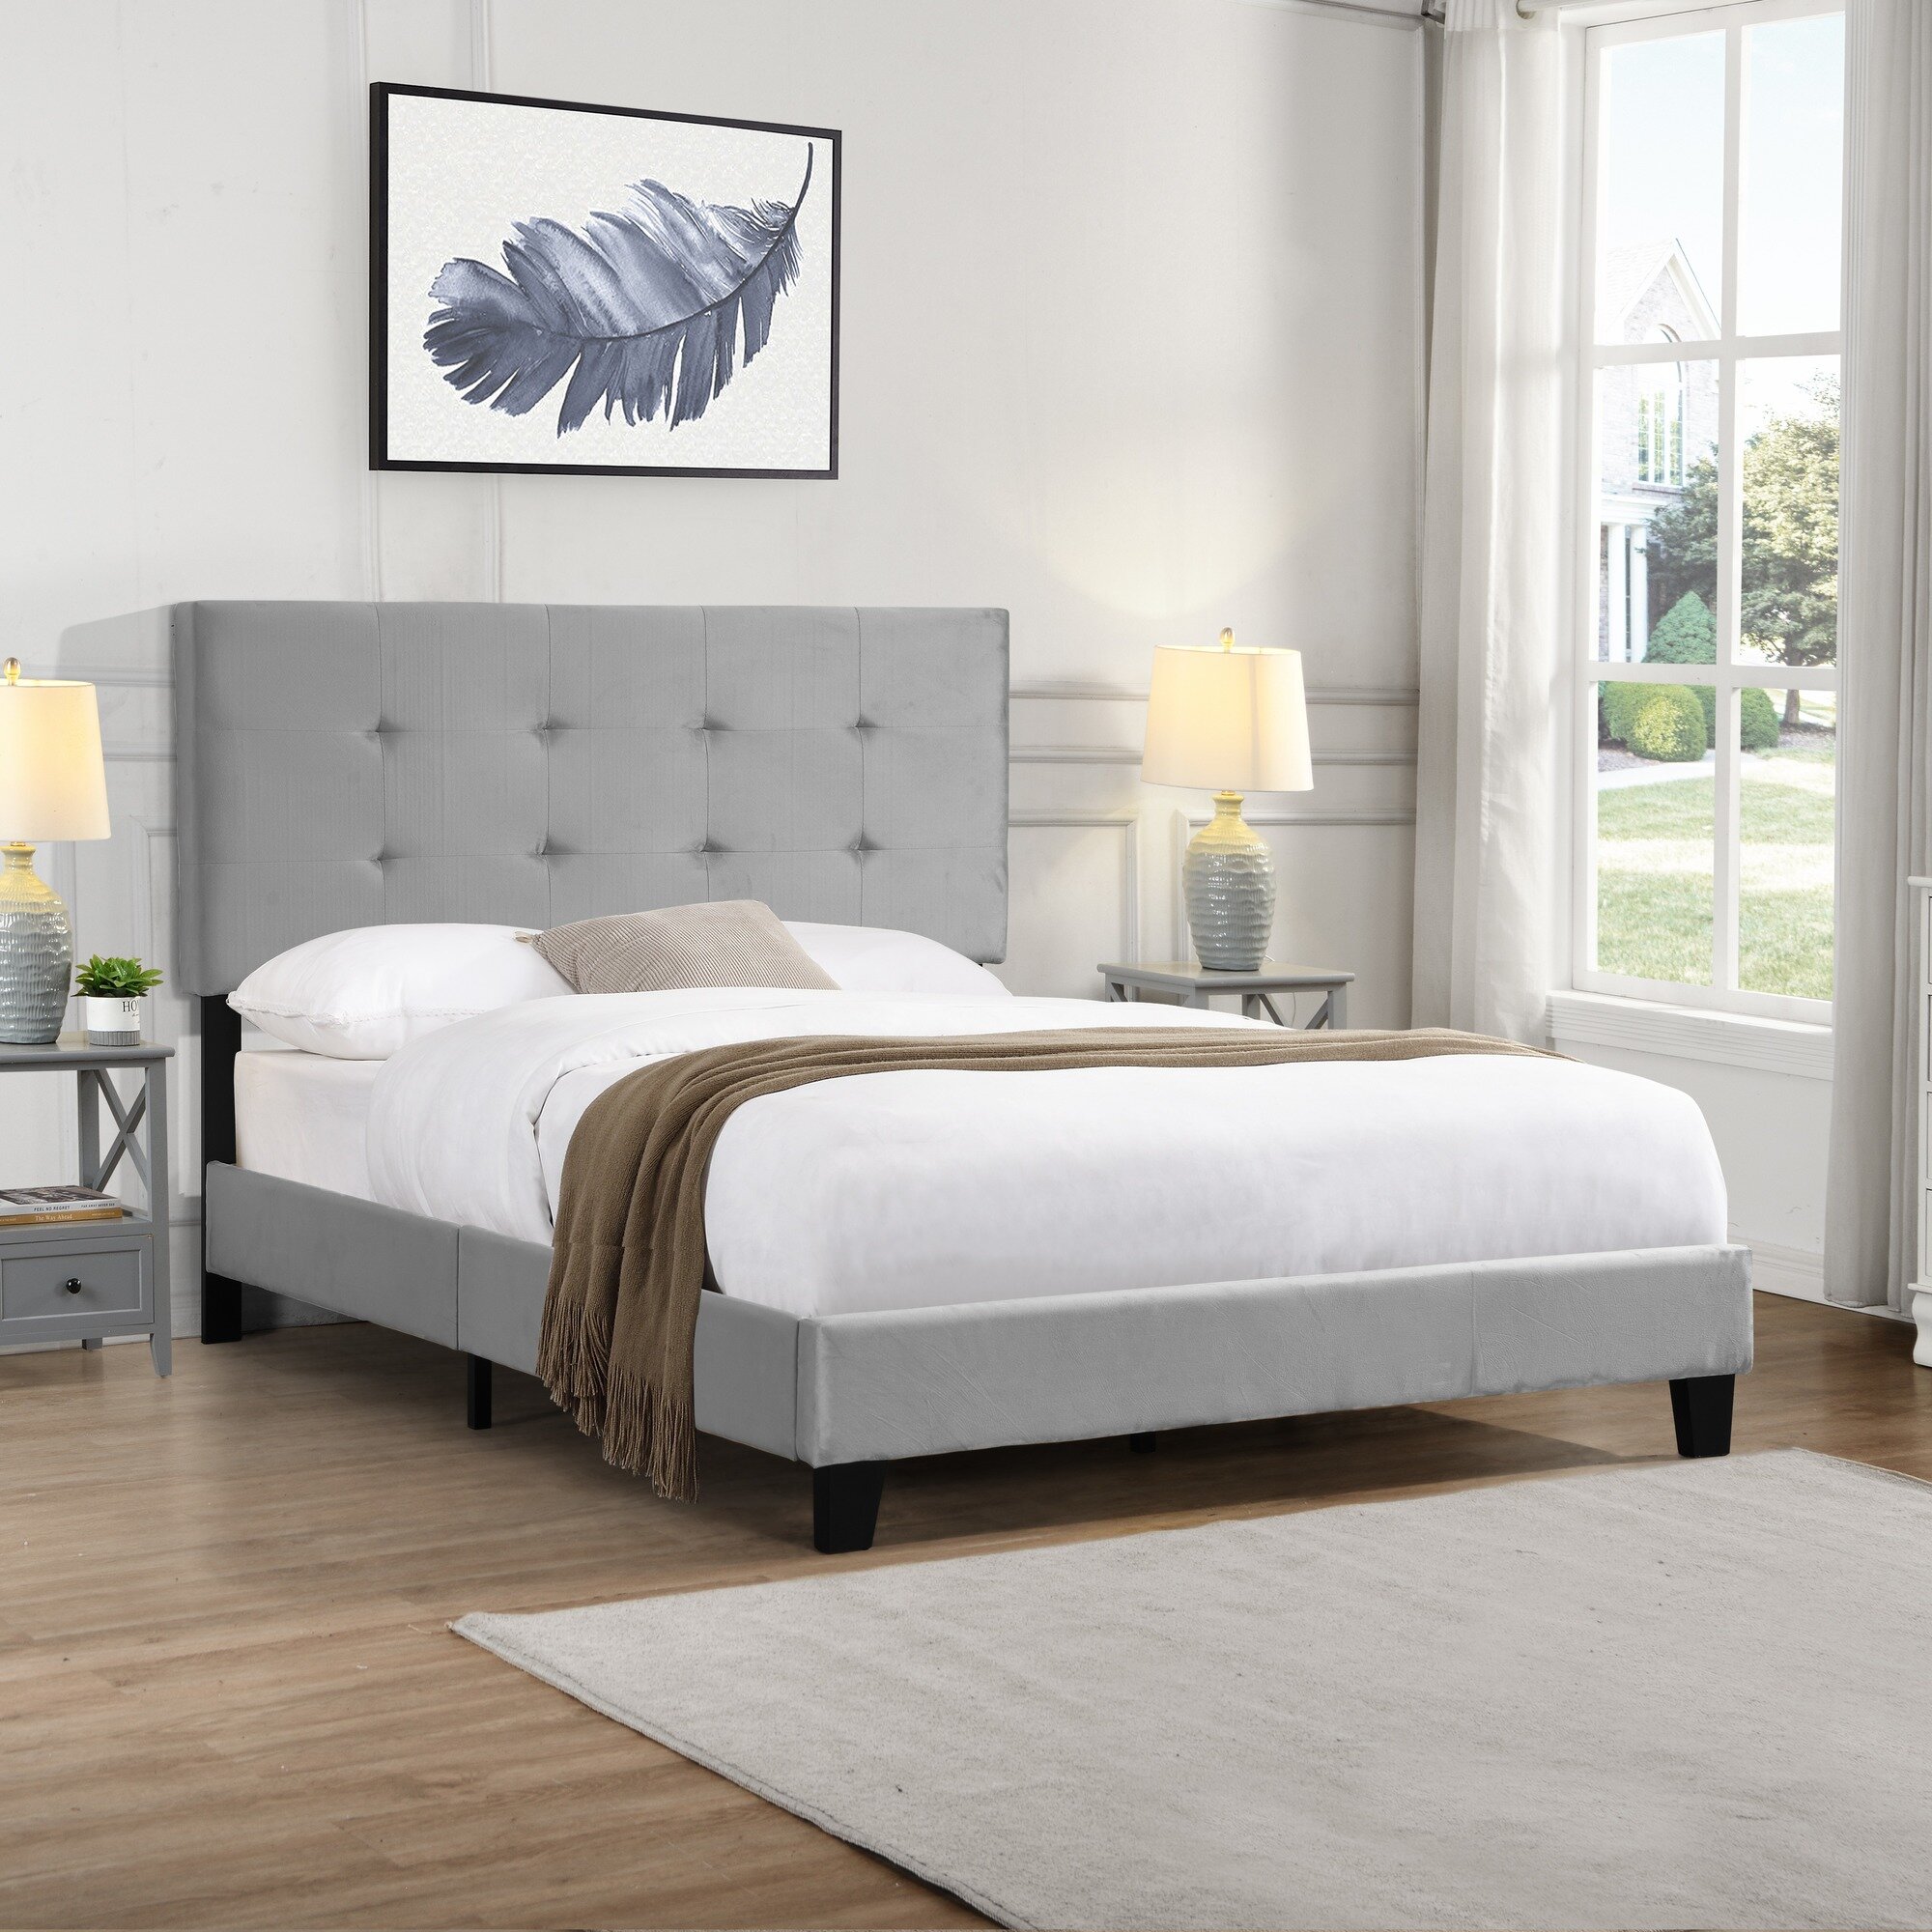 Details about   Queen Size Solid Wood Headboard Bedroom Furniture Bed Head Board Rustic Gray NEW 